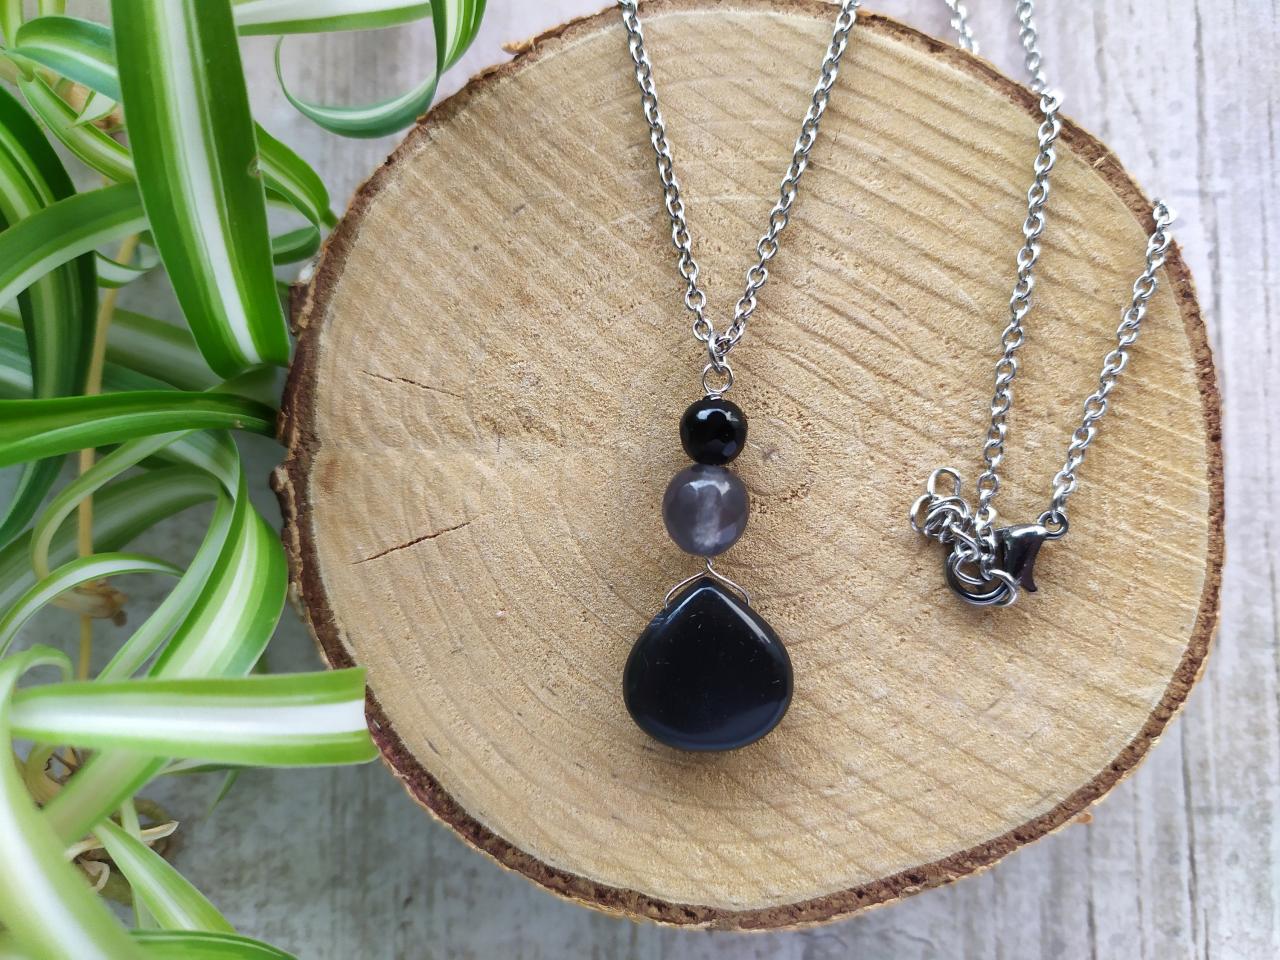 Black Onyx And Agate Pendant, Simple Elegant Gemstone Necklace, Black Boho Pendant, Wire Wrapped Gemstone And Stainless Steel Necklace